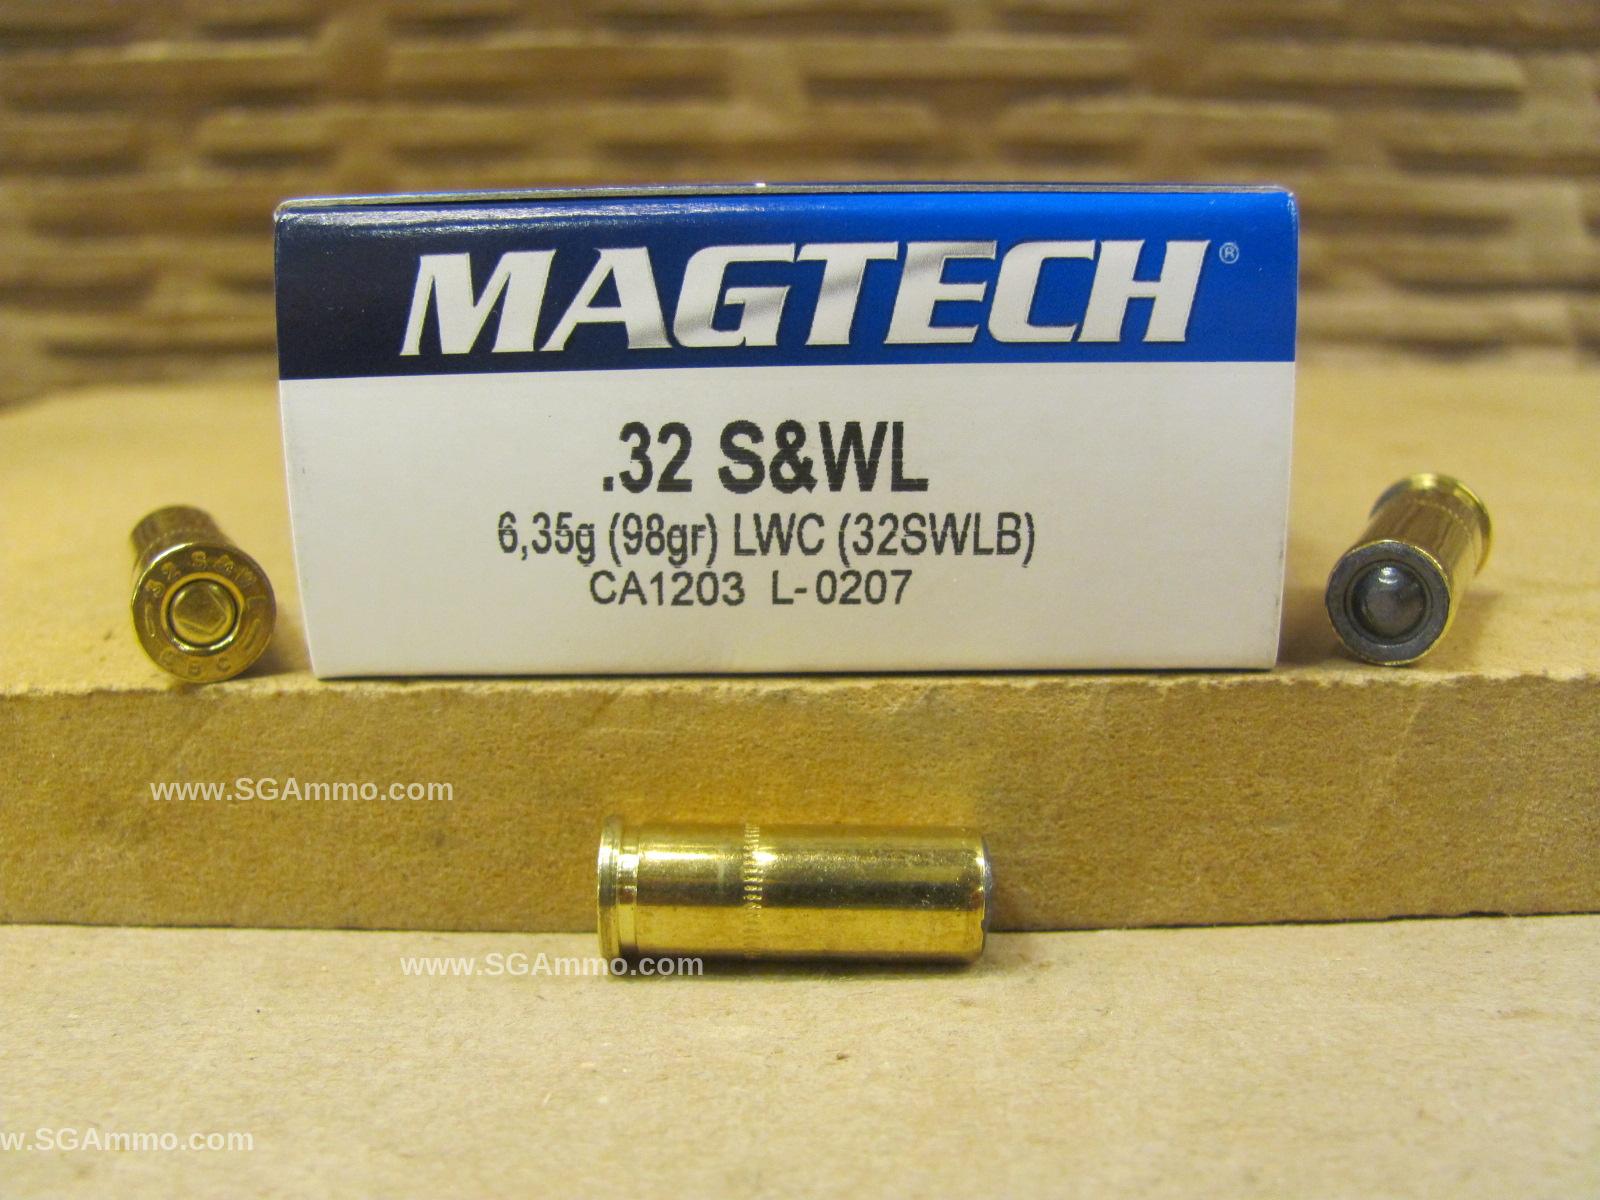 50 Round Box - 32 SW Long LWC Lead Bullet Magtech Ammo - 32SWLB